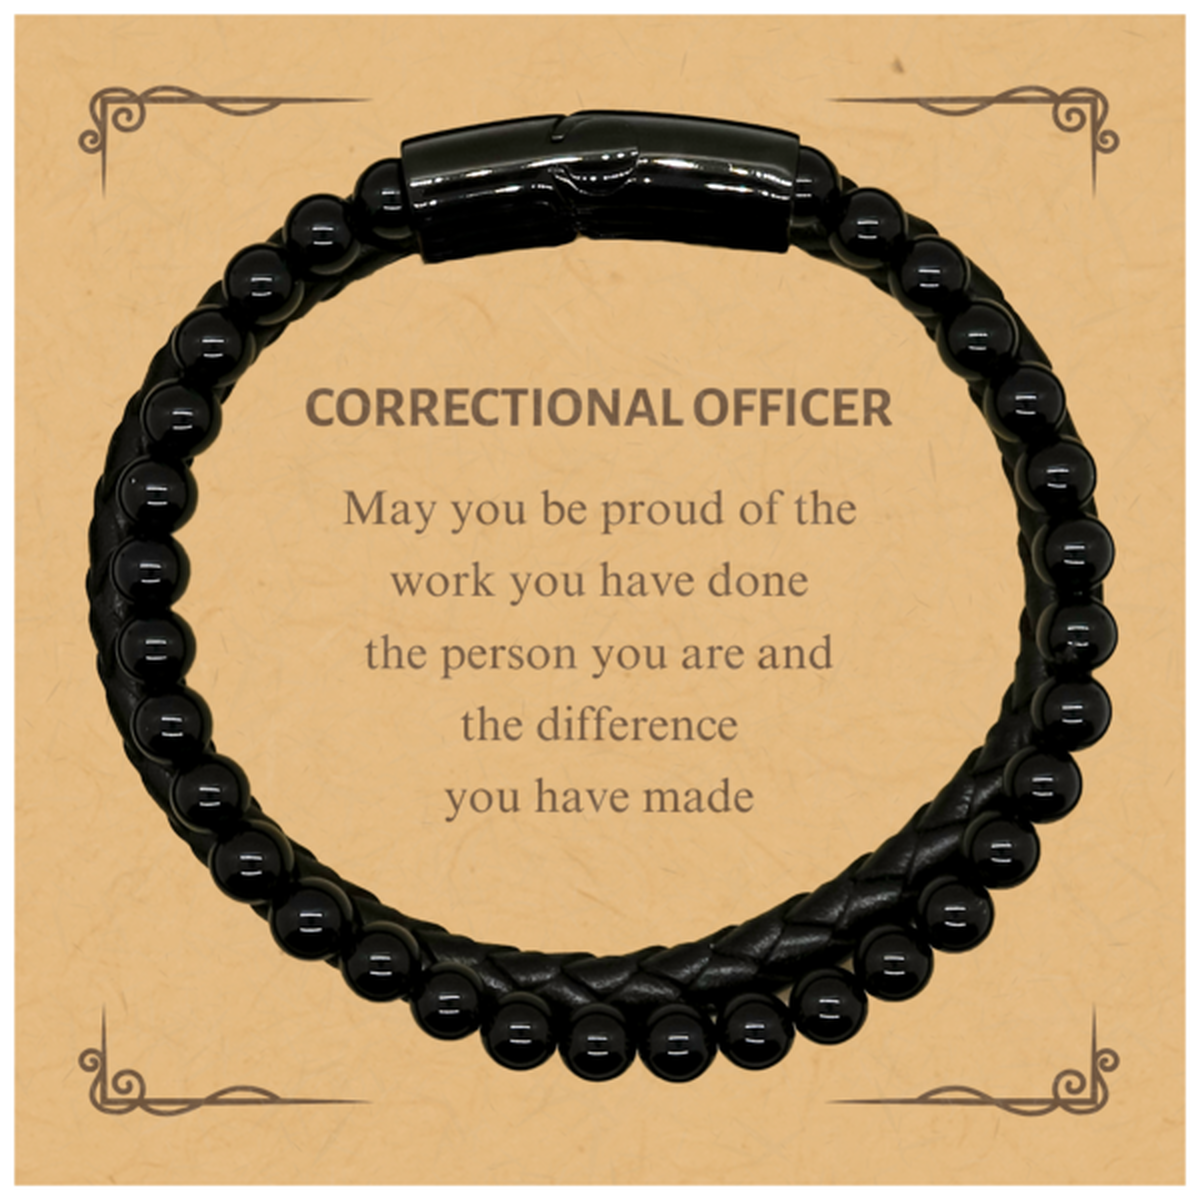 Correctional Officer May you be proud of the work you have done, Retirement Correctional Officer Stone Leather Bracelets for Colleague Appreciation Gifts Amazing for Correctional Officer